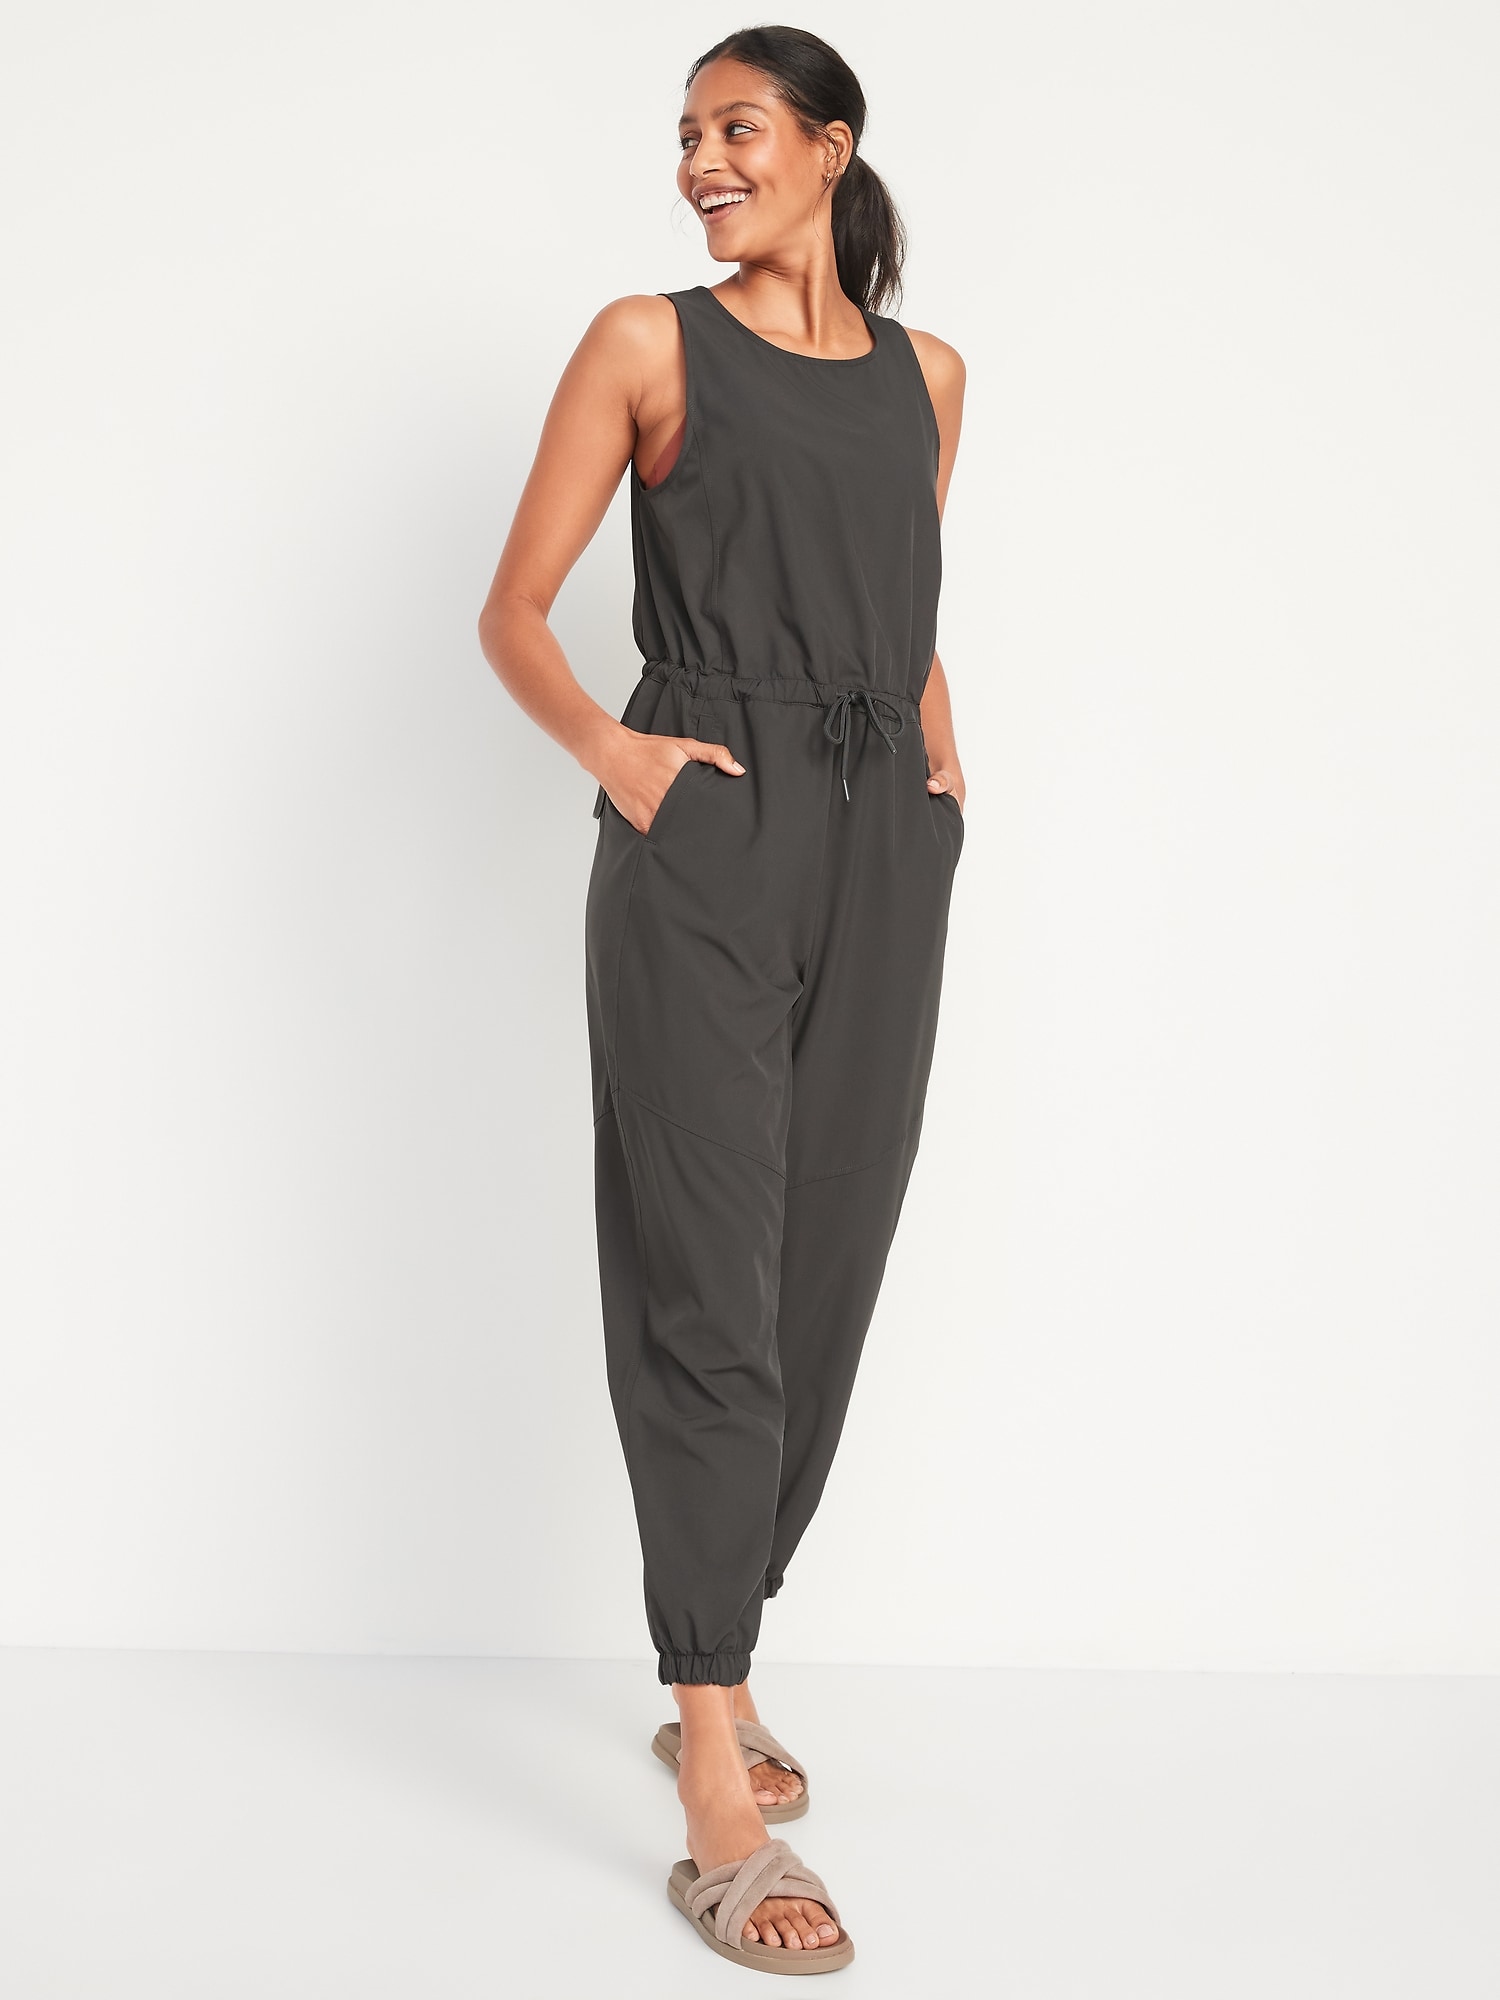 Old Navy, Pants & Jumpsuits, Old Navy Active Leggings